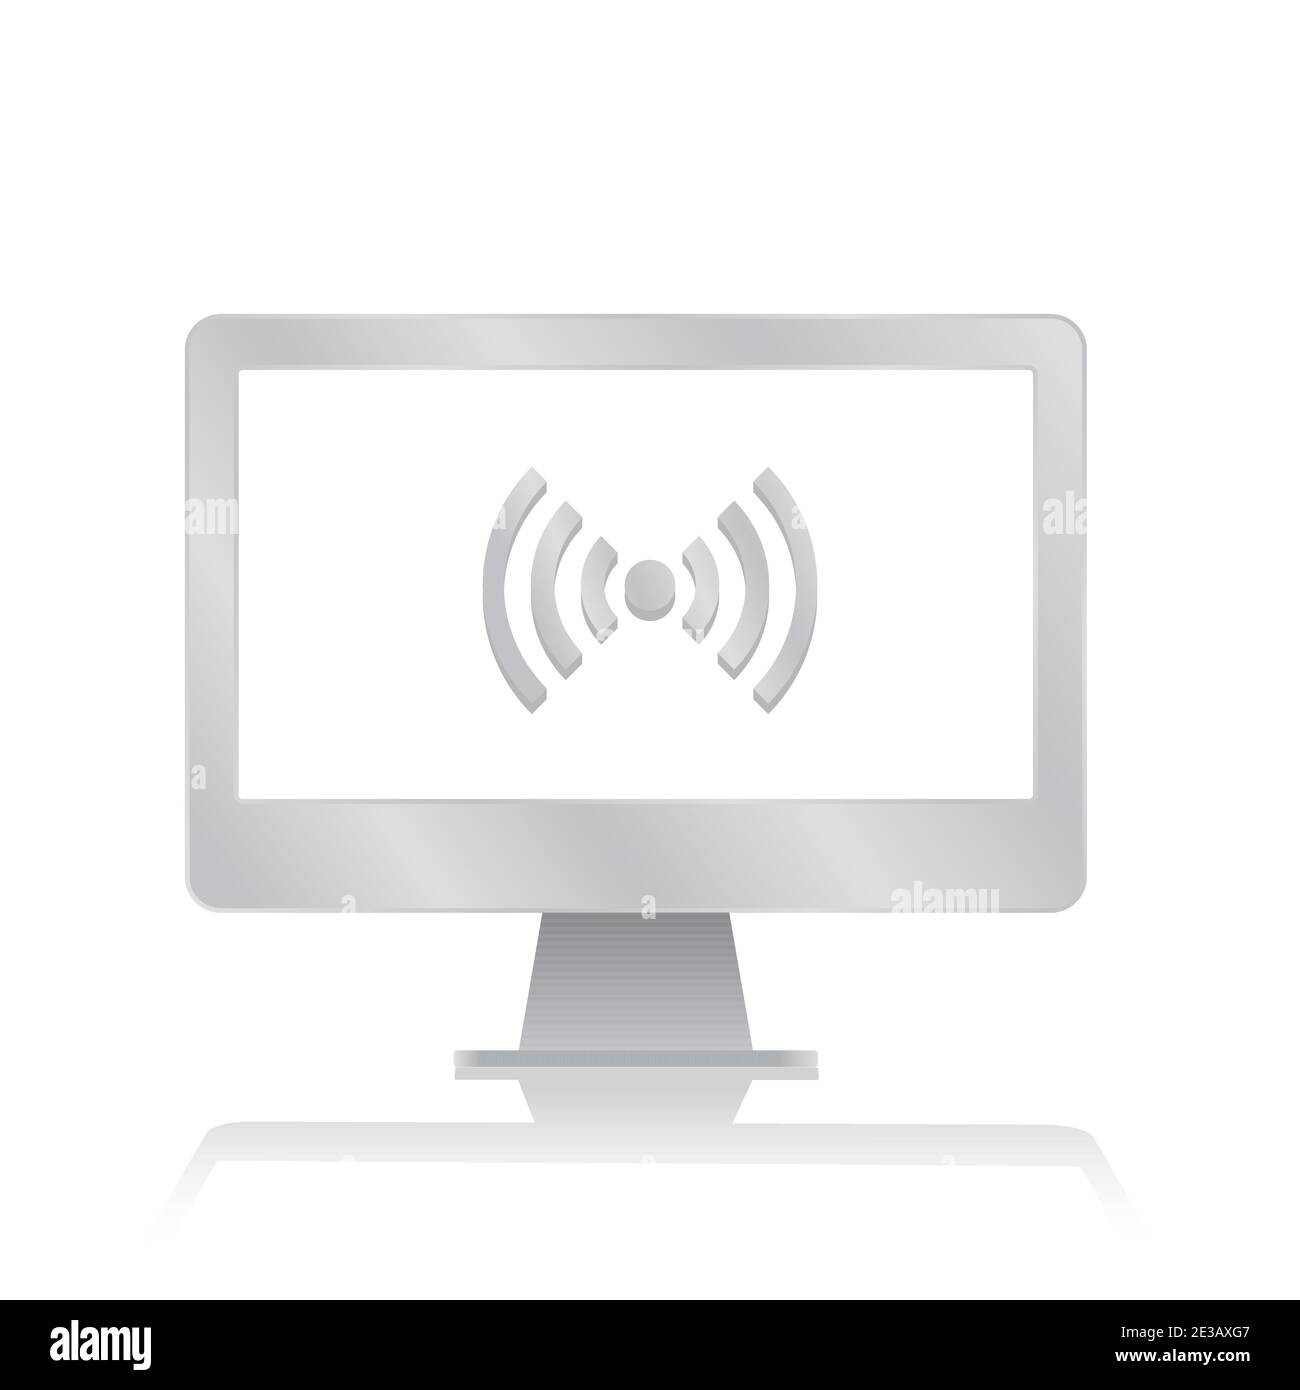 online inside blank screen computer monitor with reflection minimalist modern icon vector illustration Stock Vector